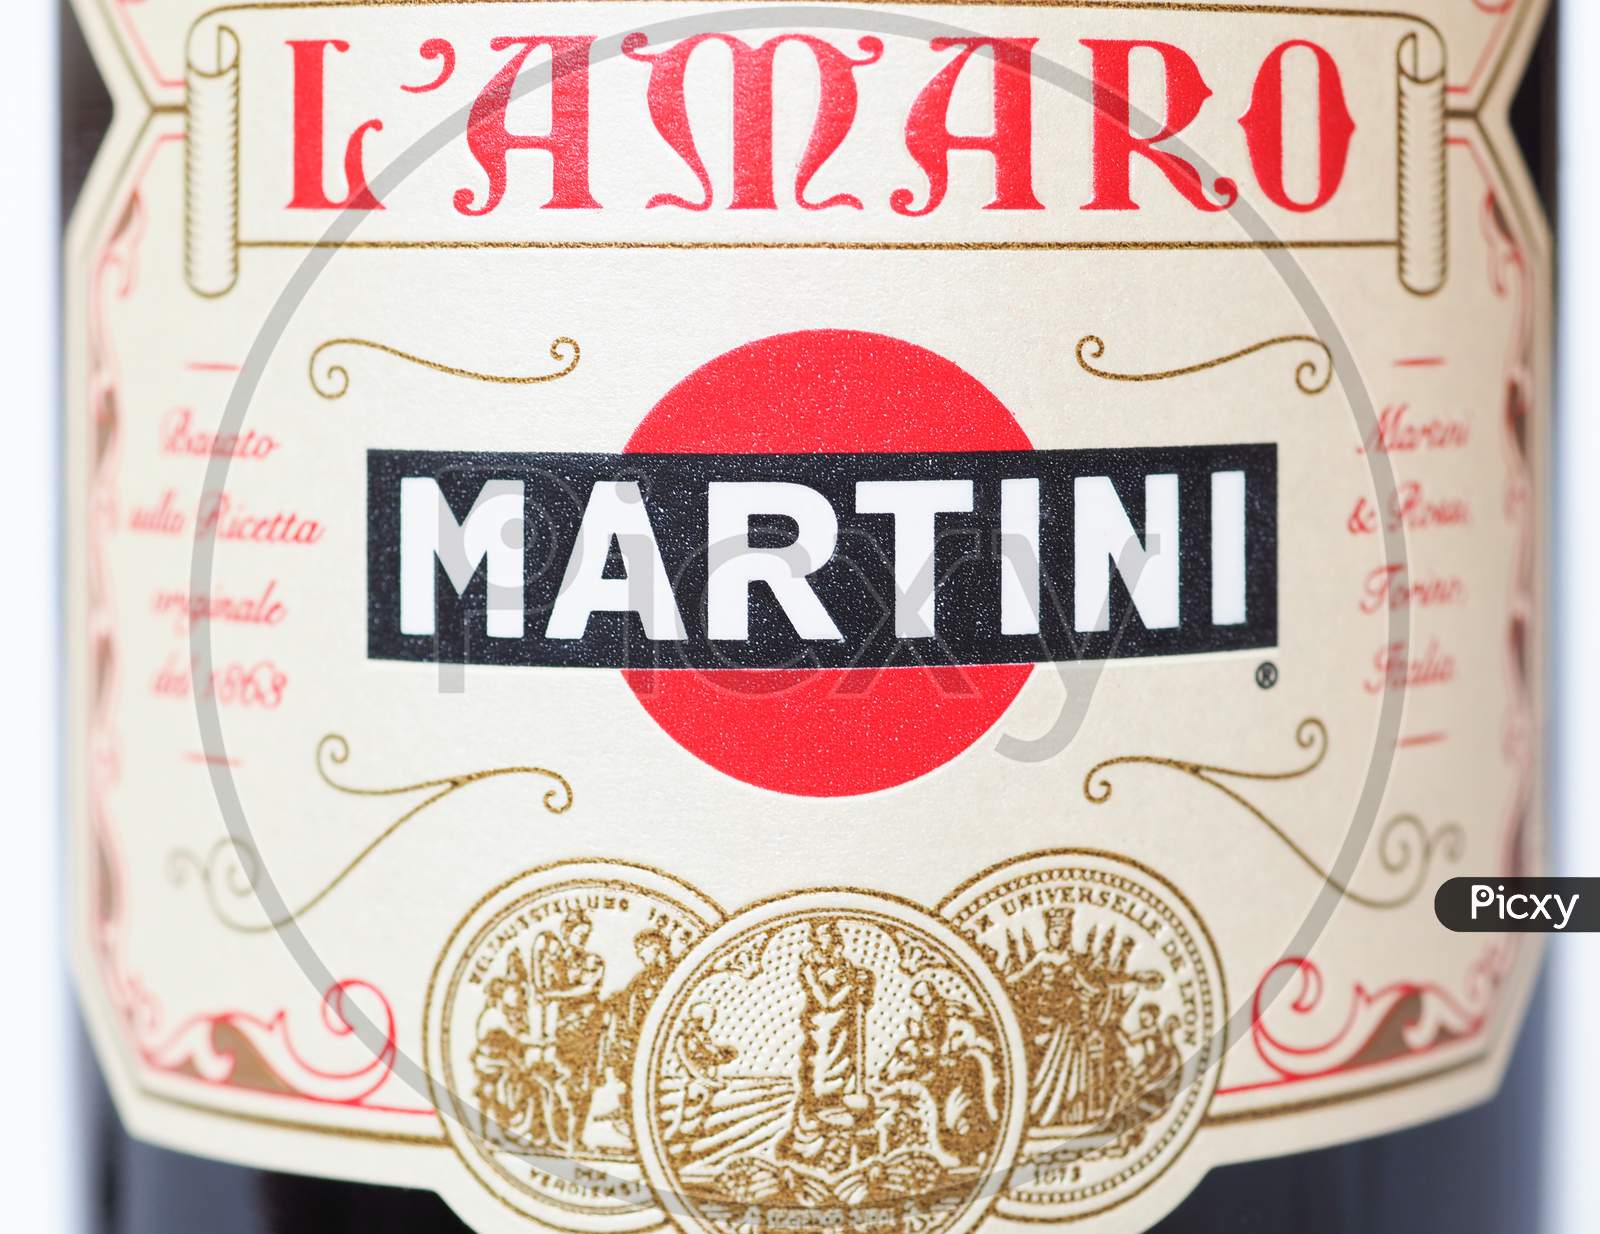 Turin, Italy - Circa August 2019: Martini Sign On Bottle Label